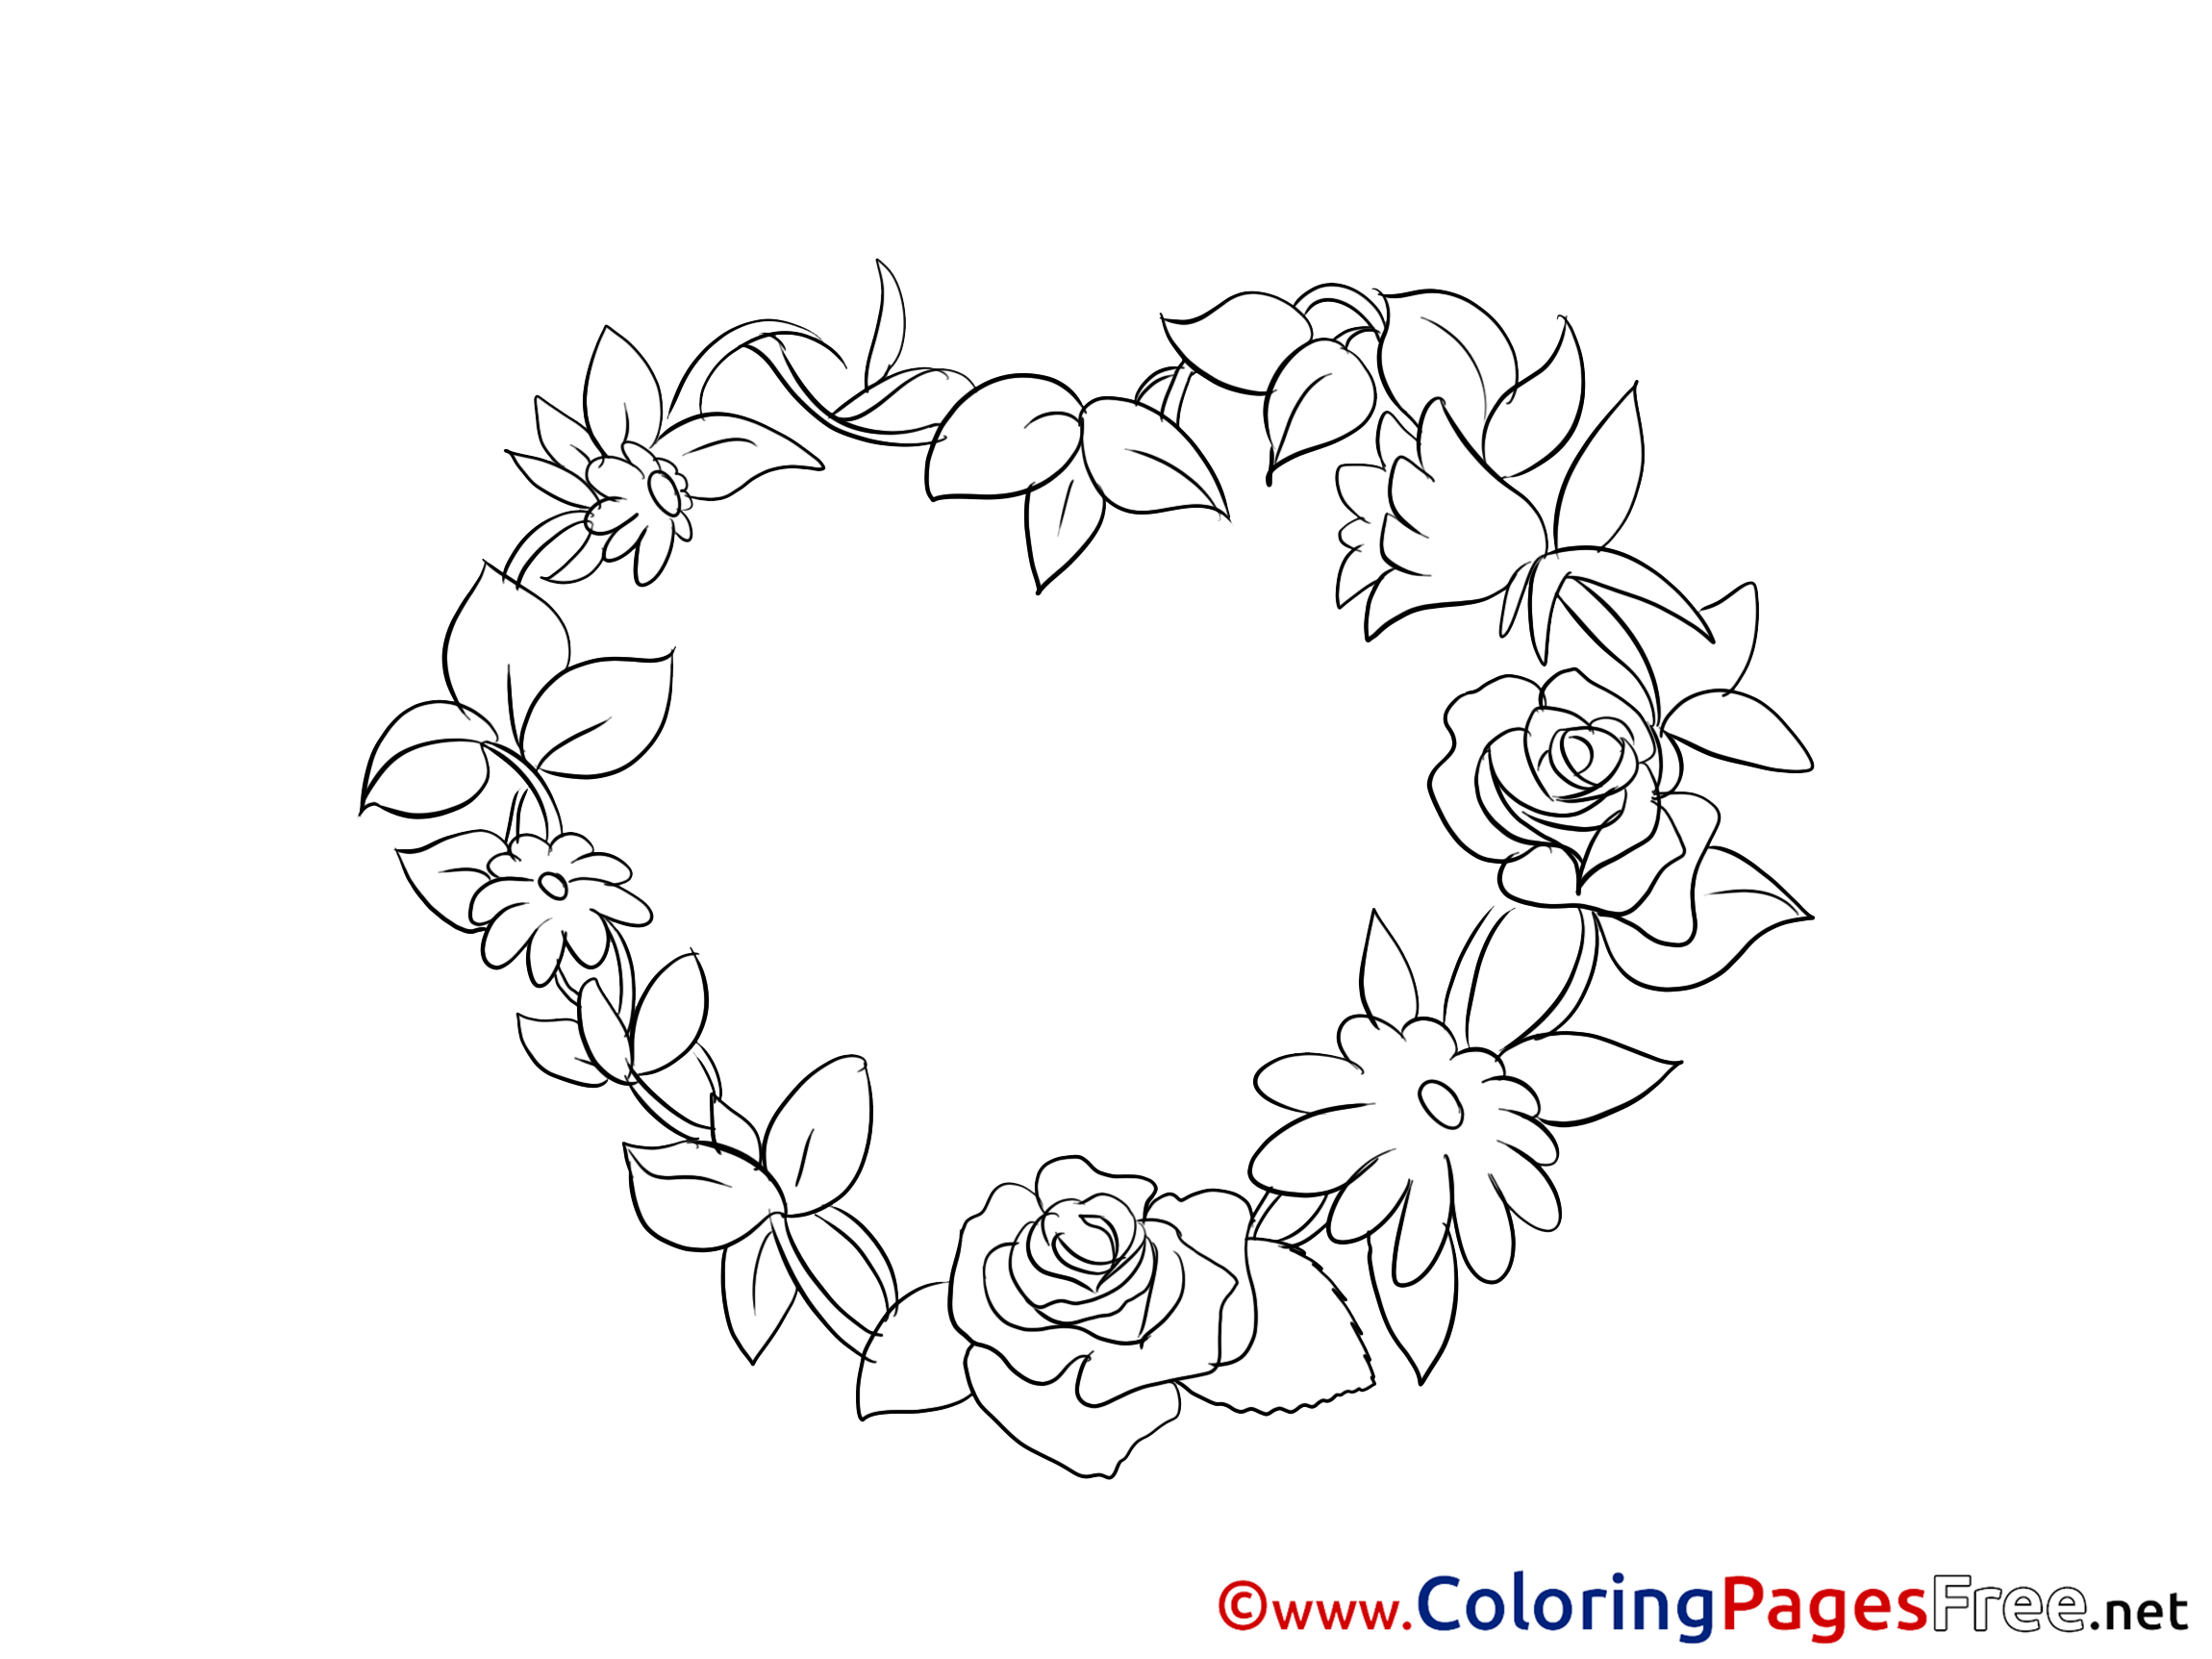 roses wreath valentine's day colouring sheet free